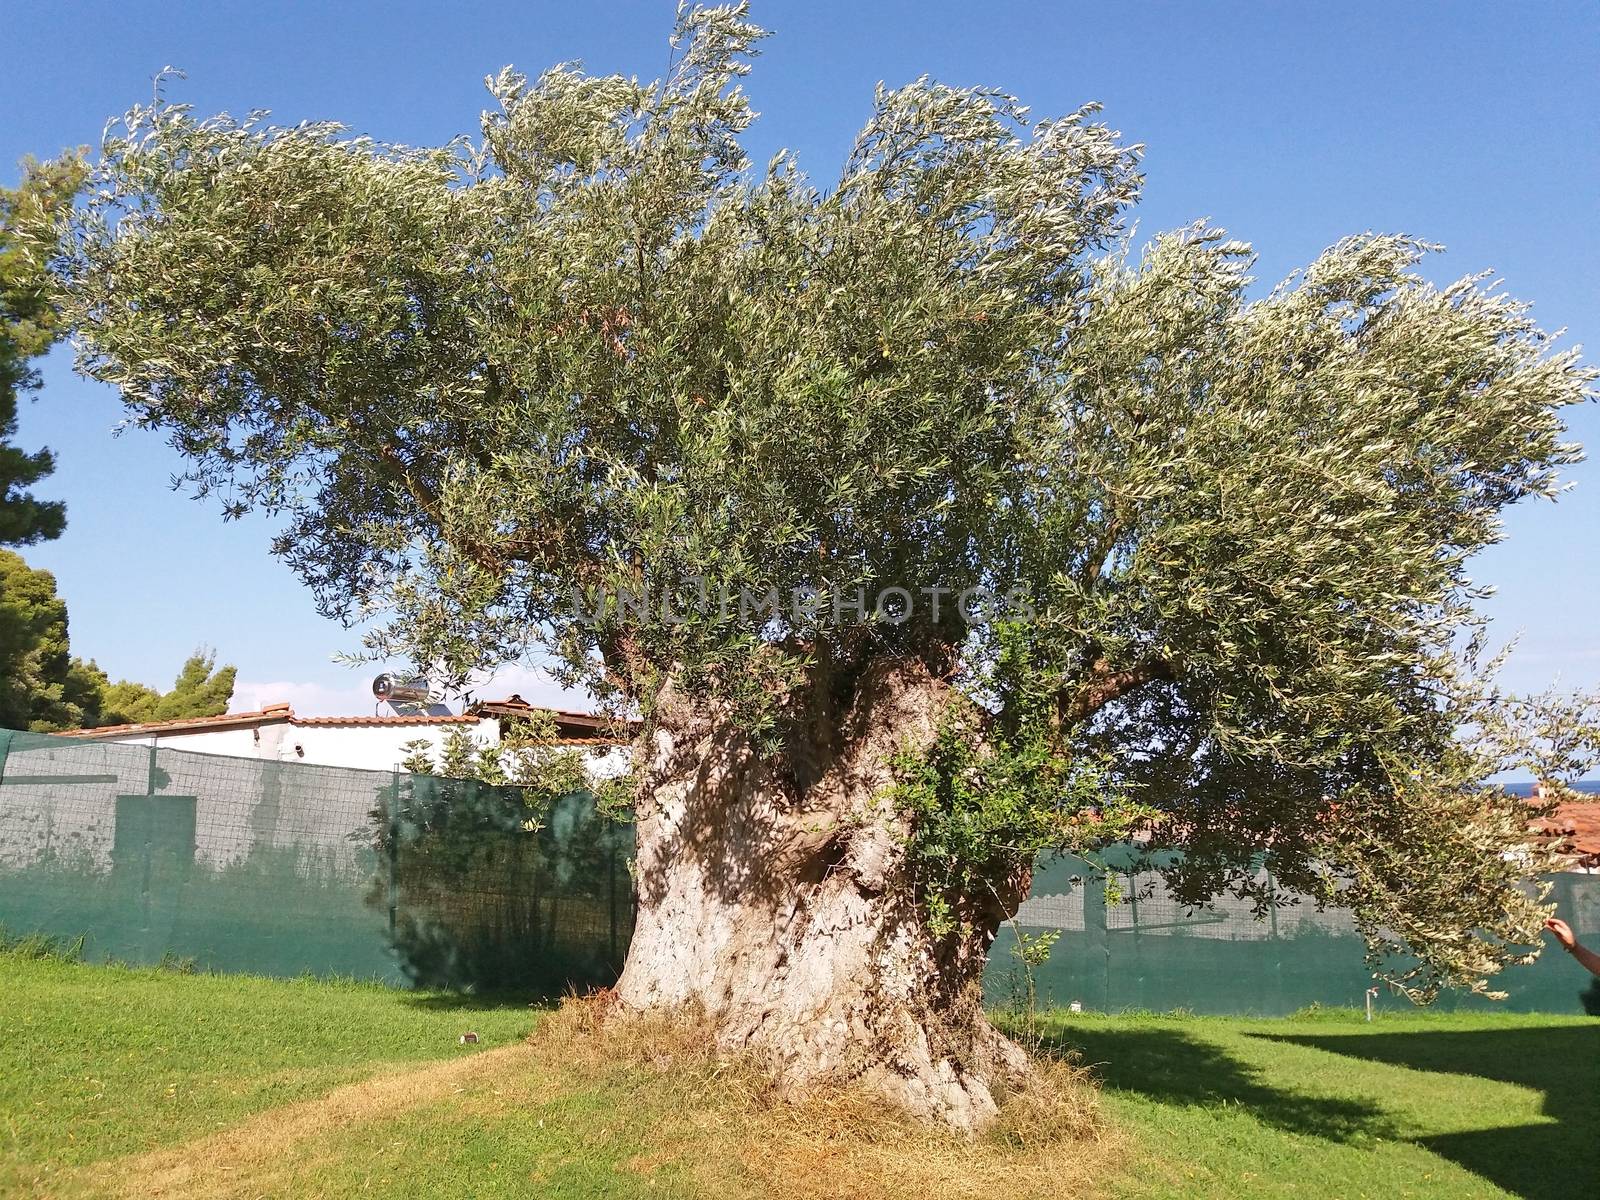 Old olive tree growing beautiful in Greece